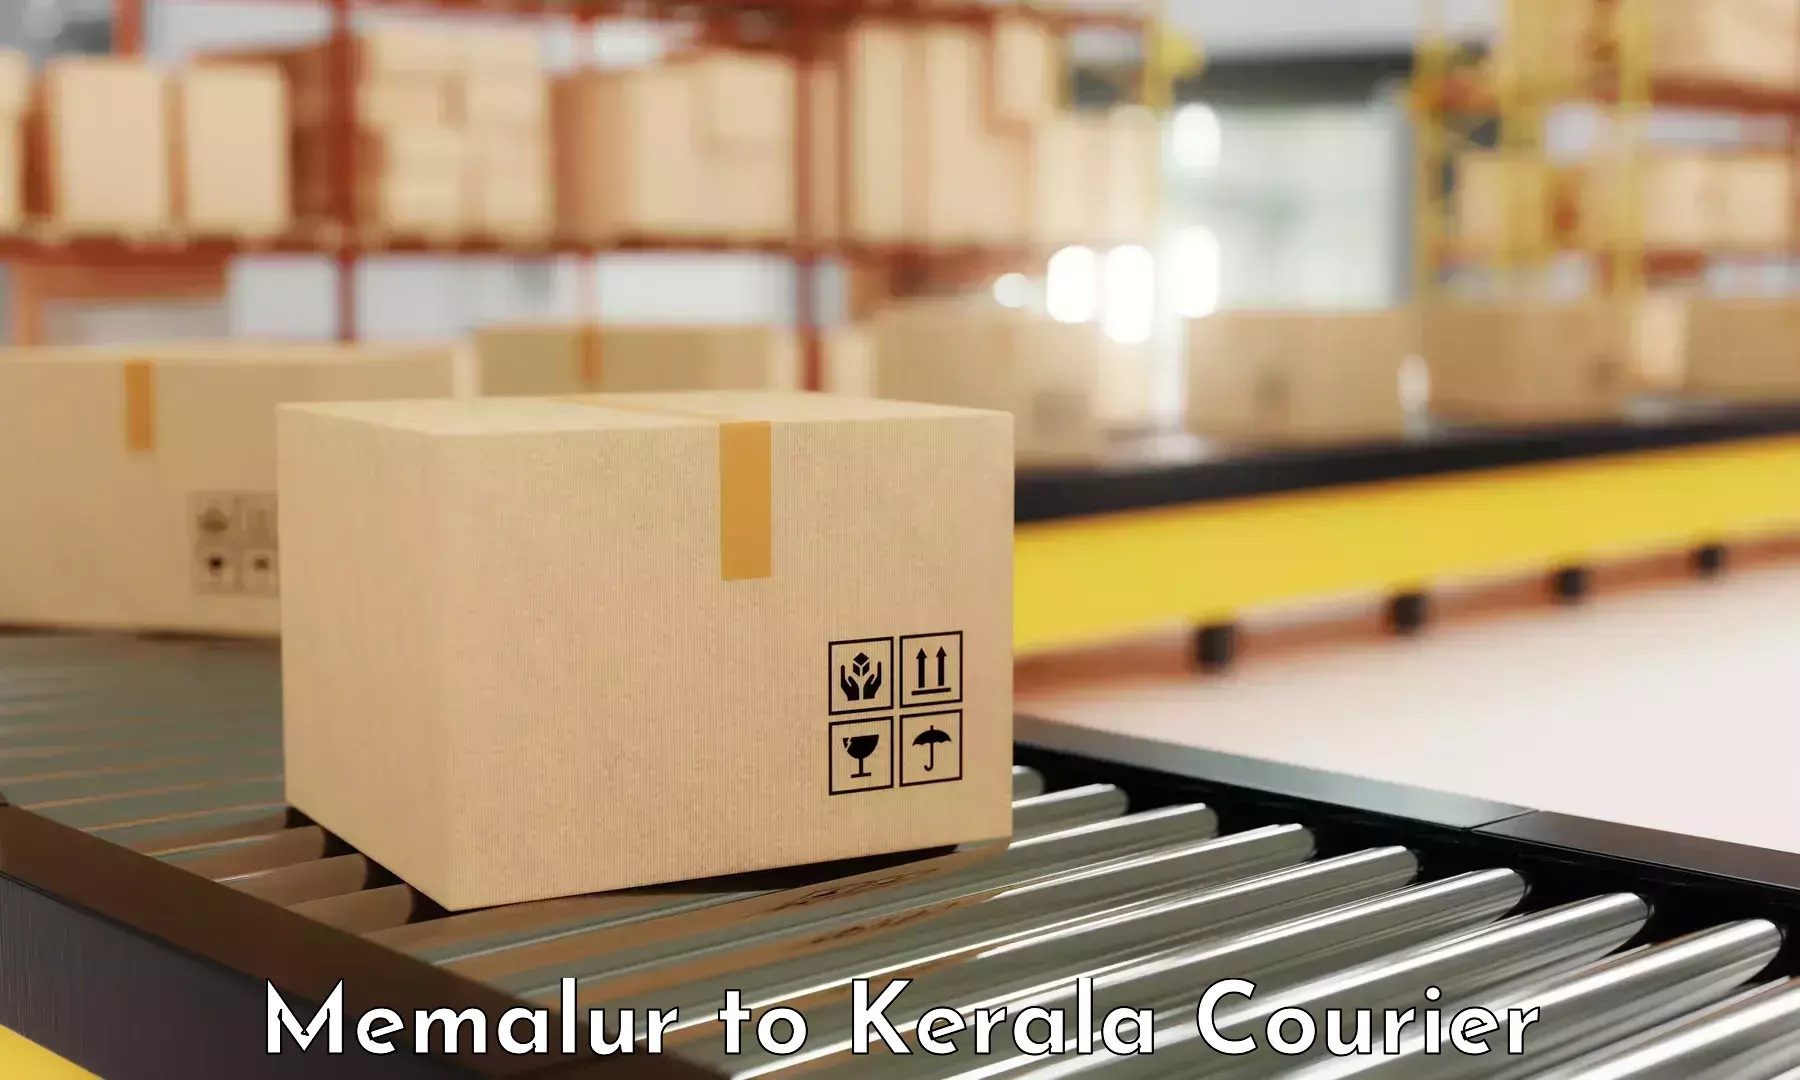 24/7 courier service Memalur to Pala